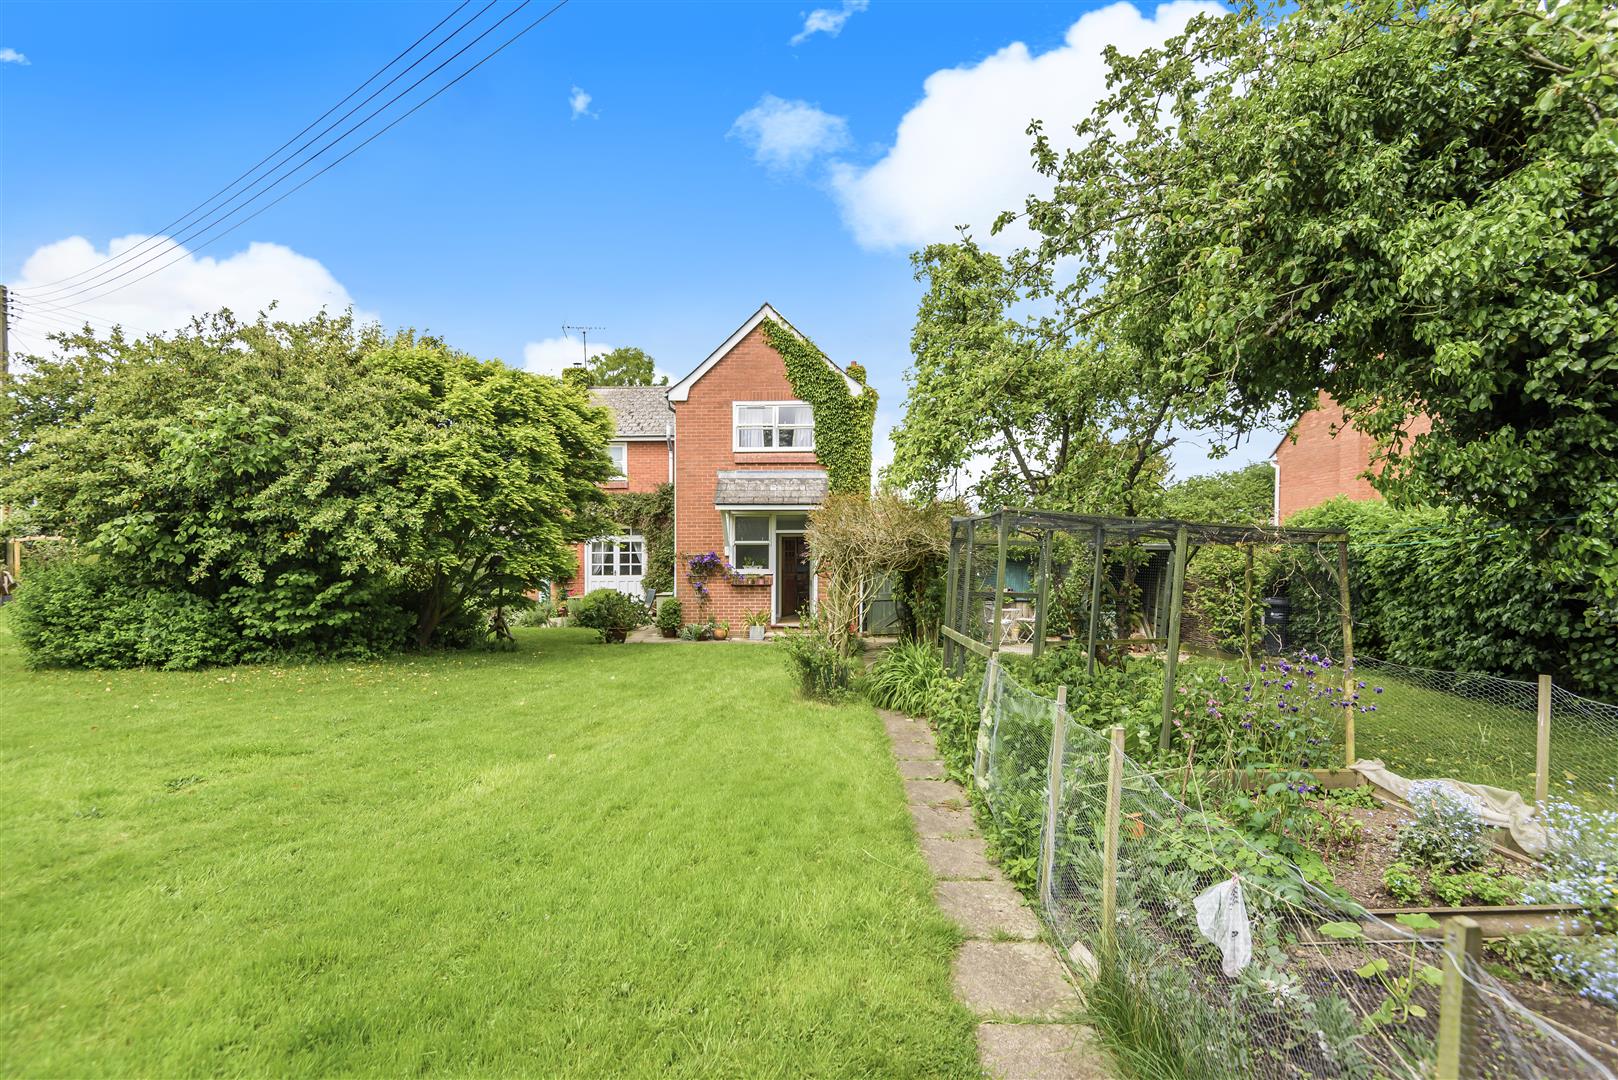 4 bed detached for sale in Lyonshall 19